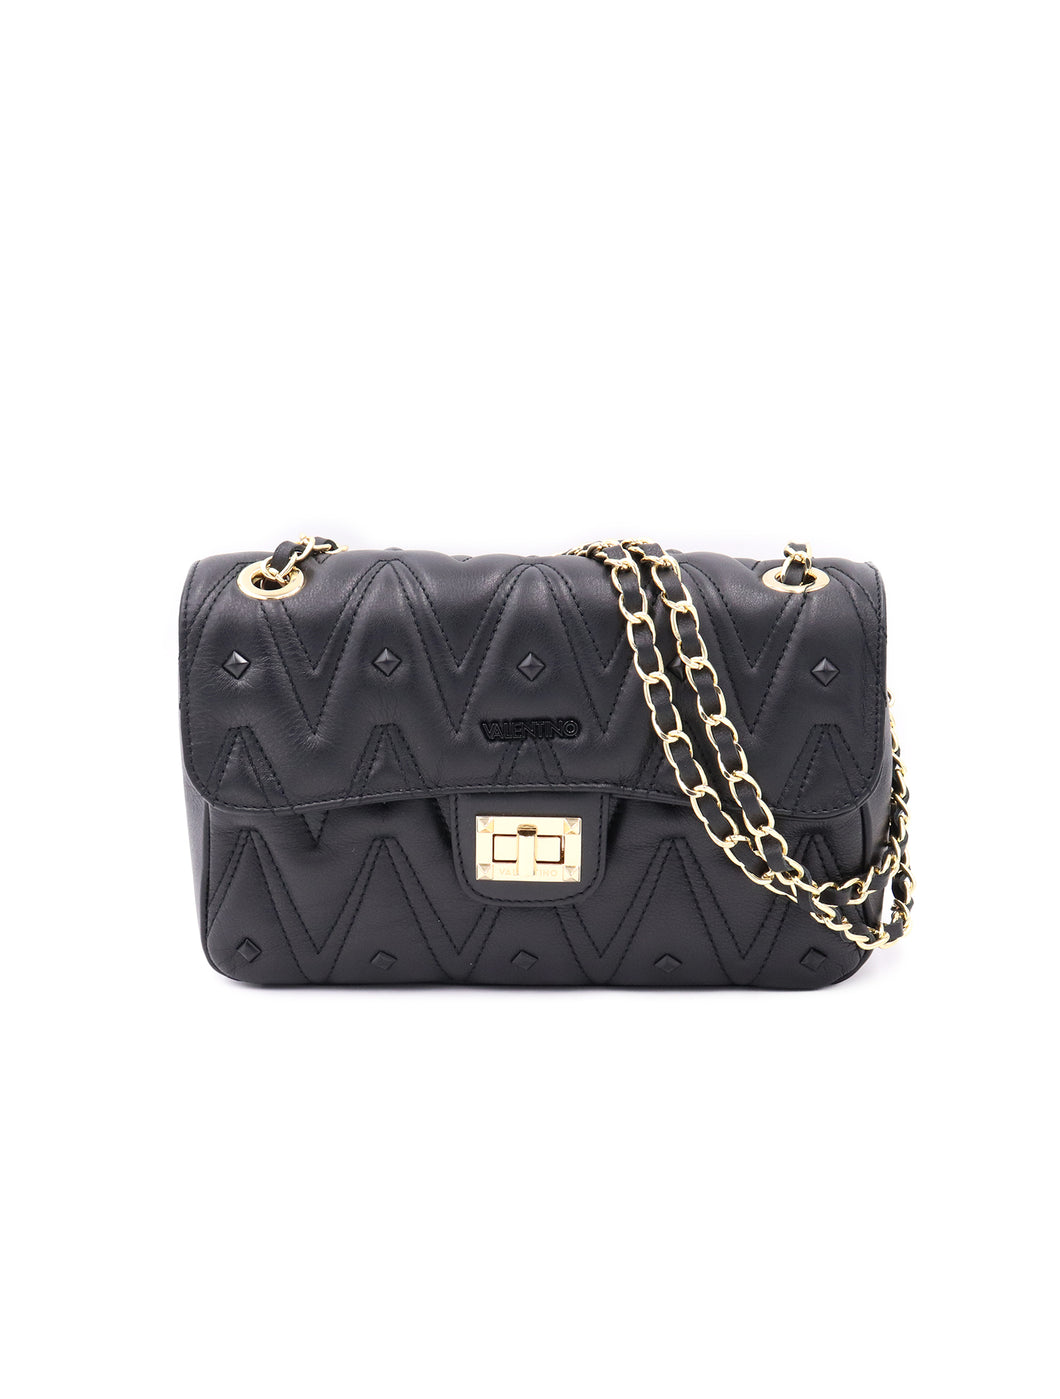 Valentino by Mario Valentino Studded Quilted Flap Shoulder Bag